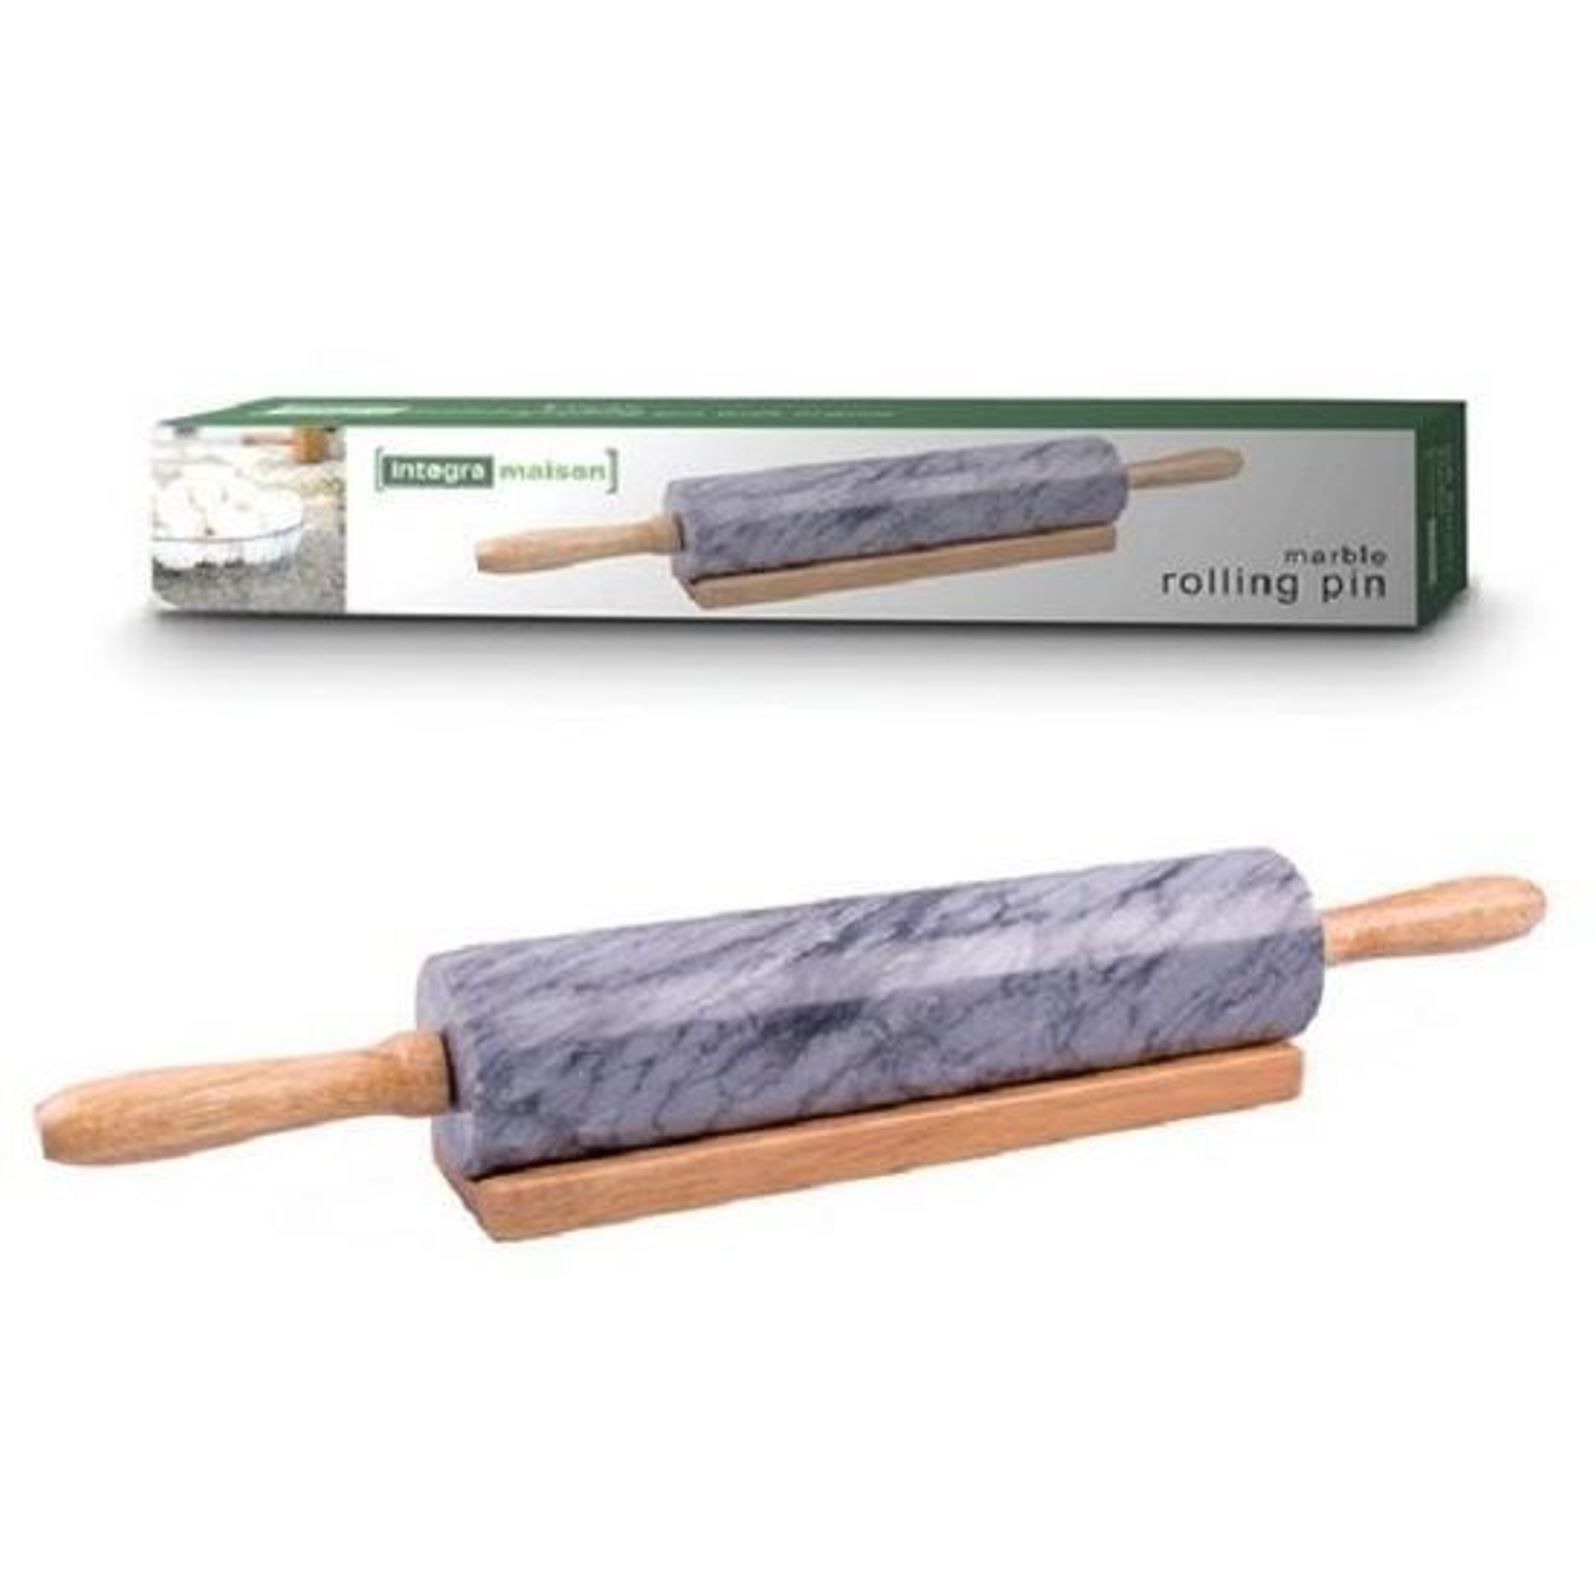 Integra Maison Marble Rolling Pin With Cradle